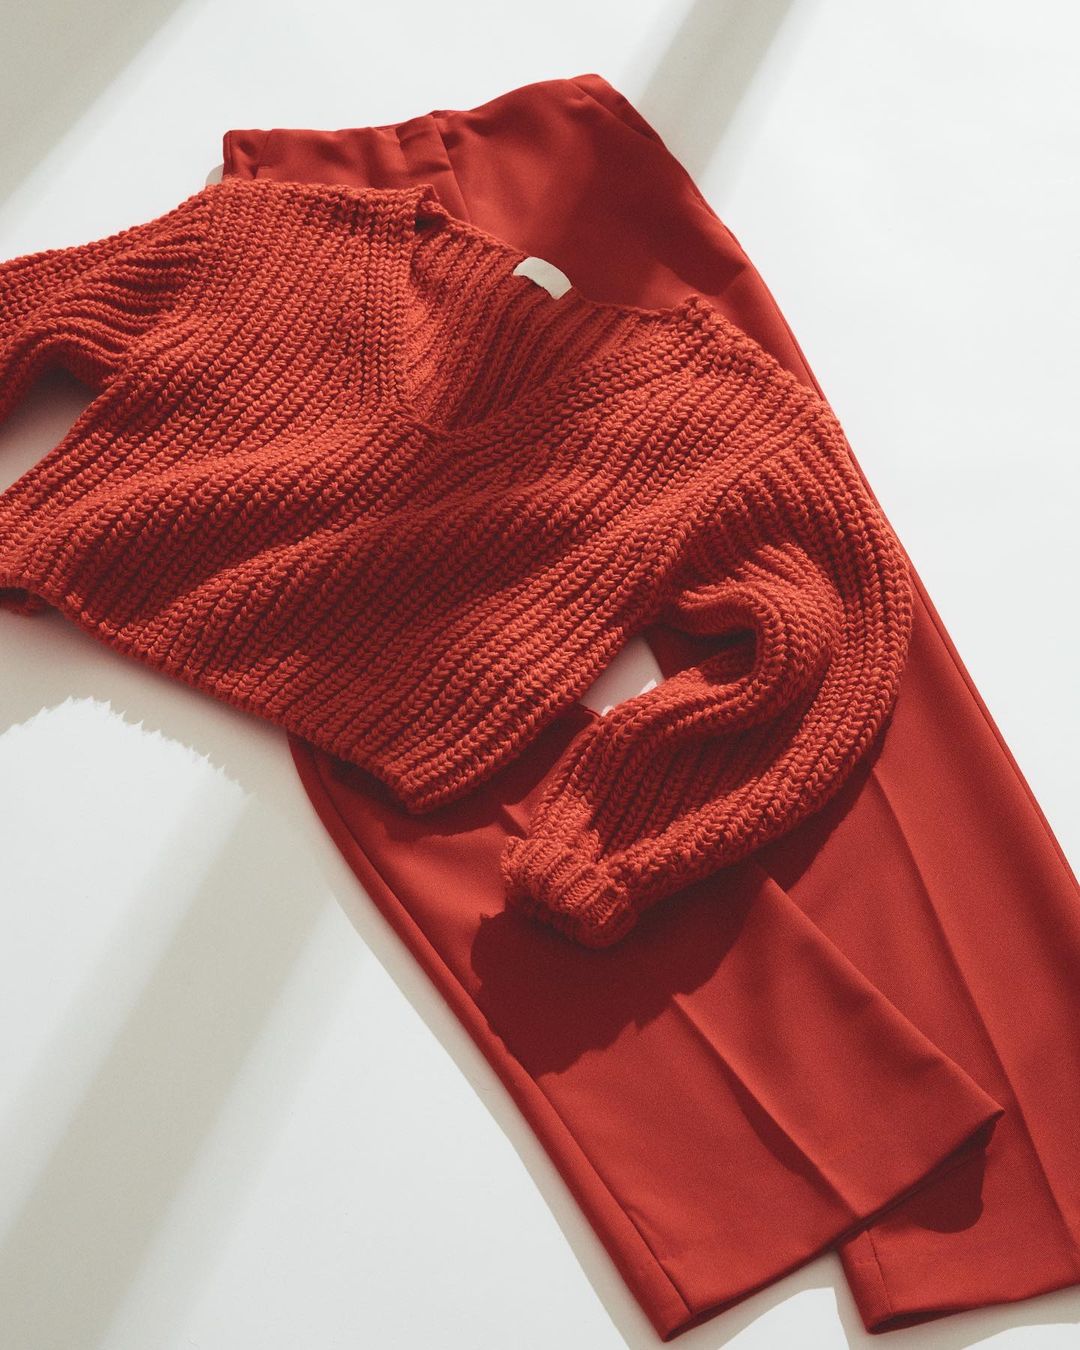 Red trousers with a red knit sweater laid over top.